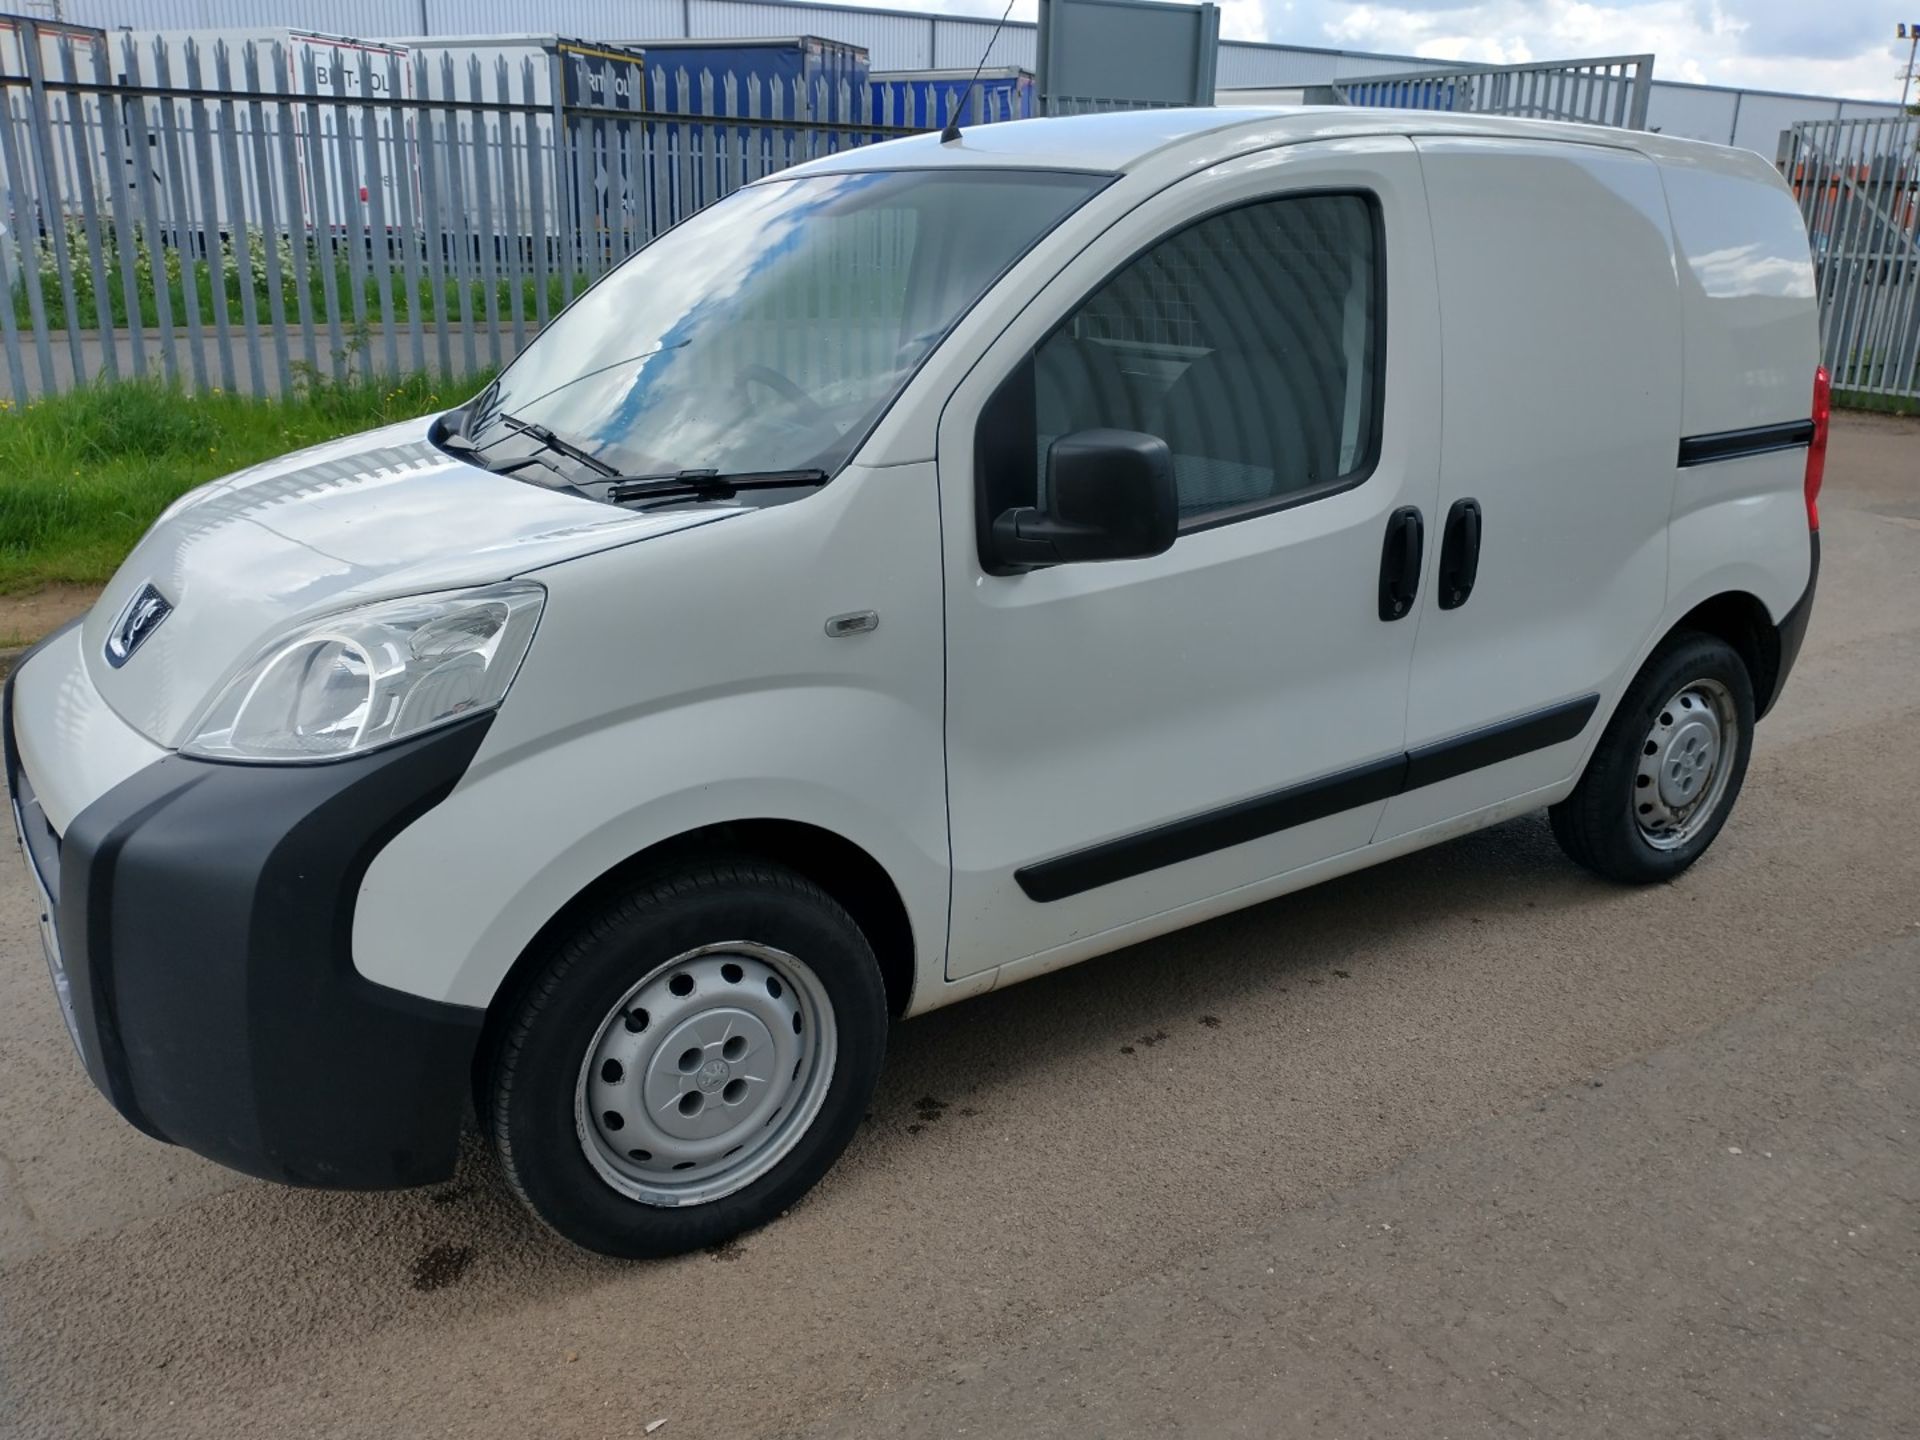 2016 Peugeot Bipper S Hdi Panel van - CL505 - Location: Corby - Image 8 of 15